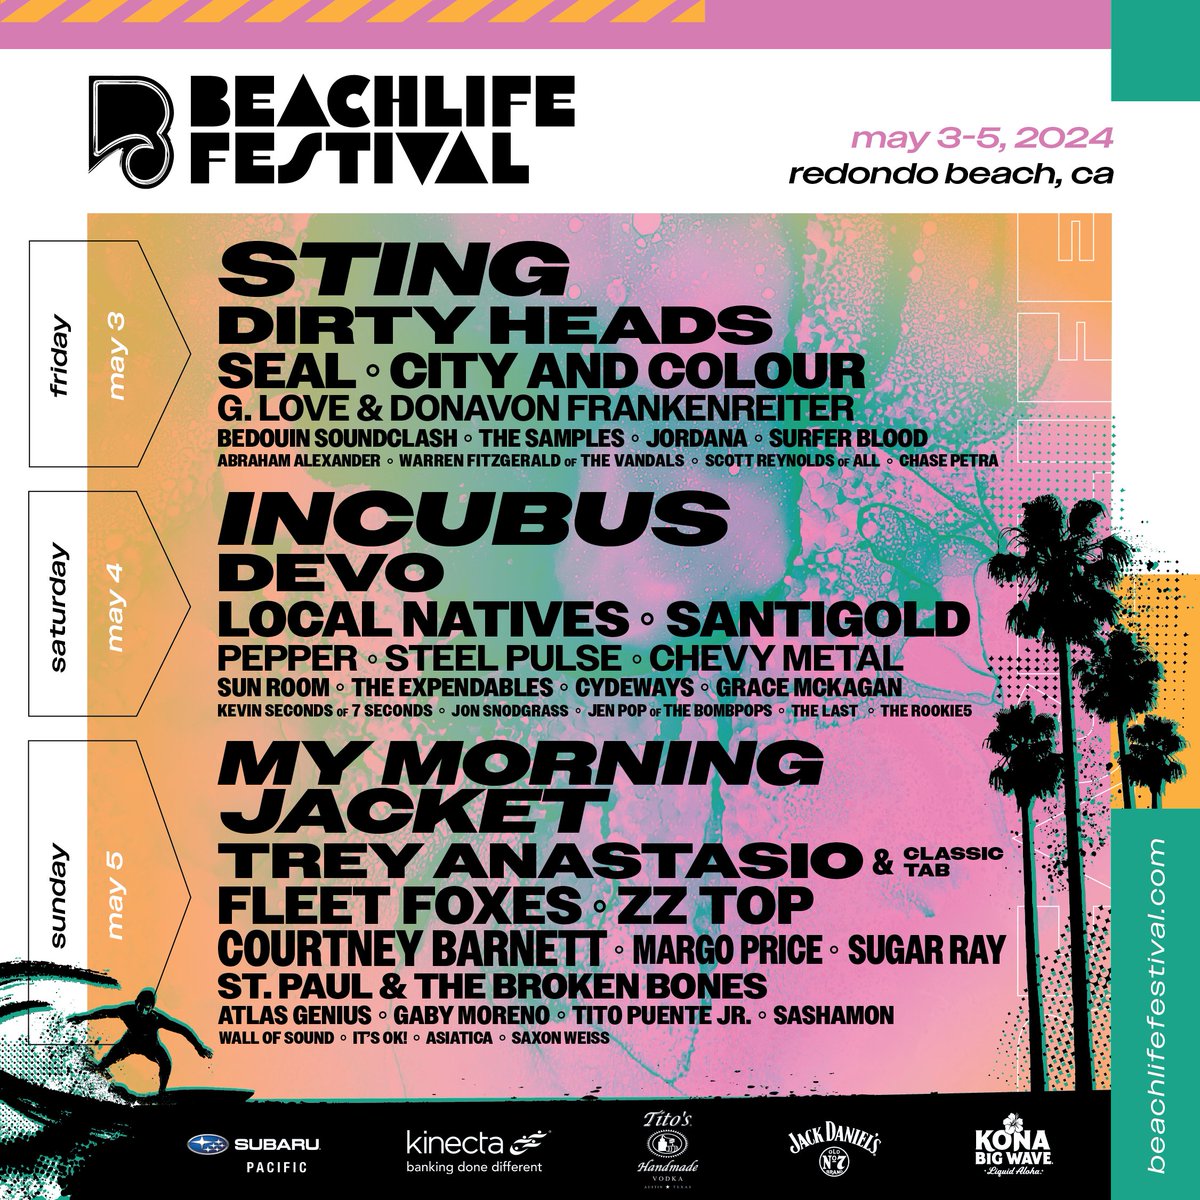 Join me on the BEACH in Los Angeles this May! See you in the sand at @beachlifefestival 🌴